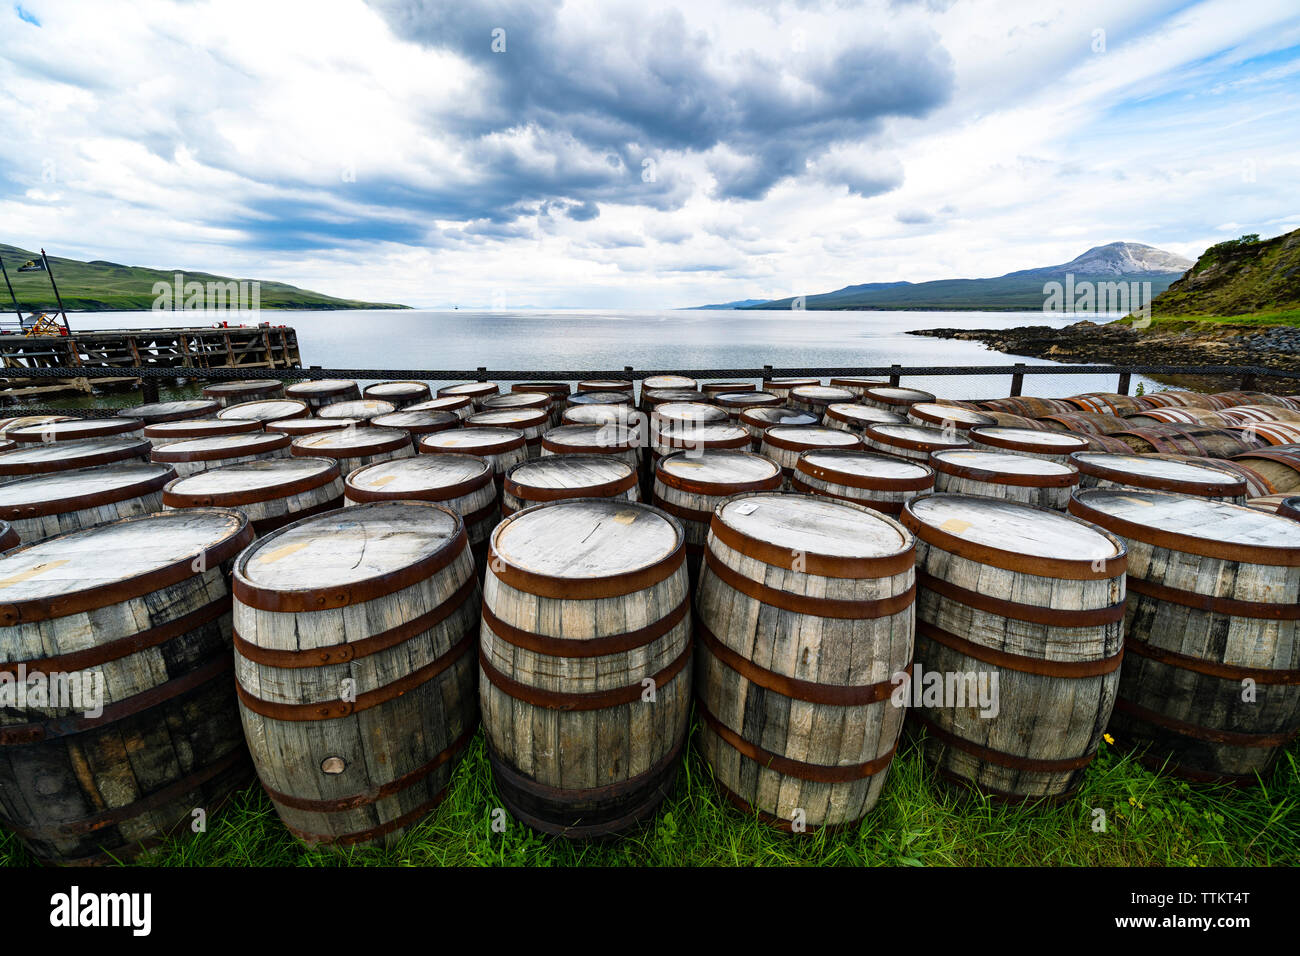 View of scotch whisky barrels at Bunnahabhain Distillery on island of Islay in Inner Hebrides of Scotland, UK Stock Photo